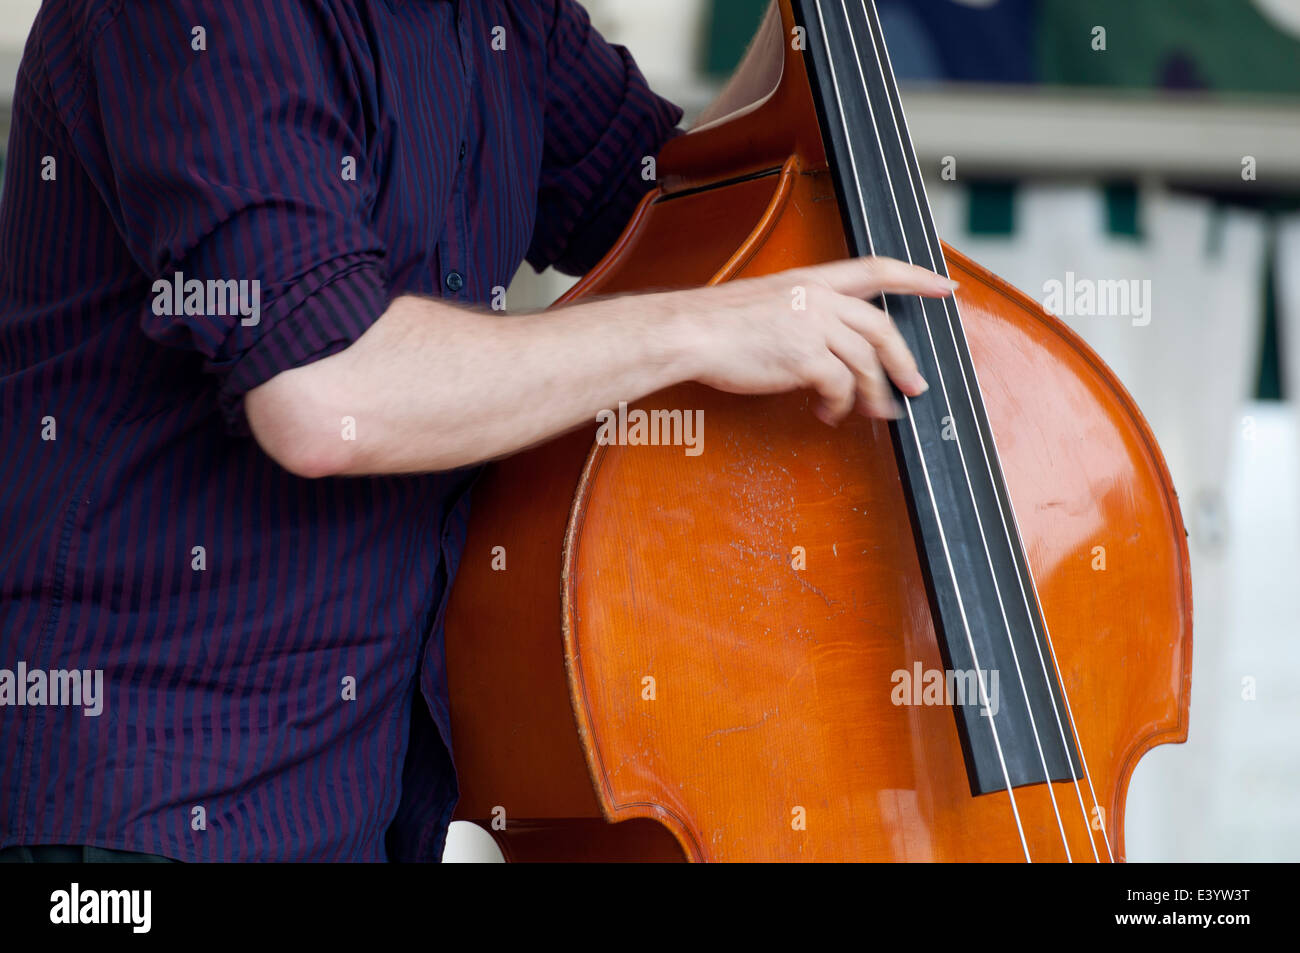 Man playing a double bass at Leamington Peace Festival, UK Stock Photo